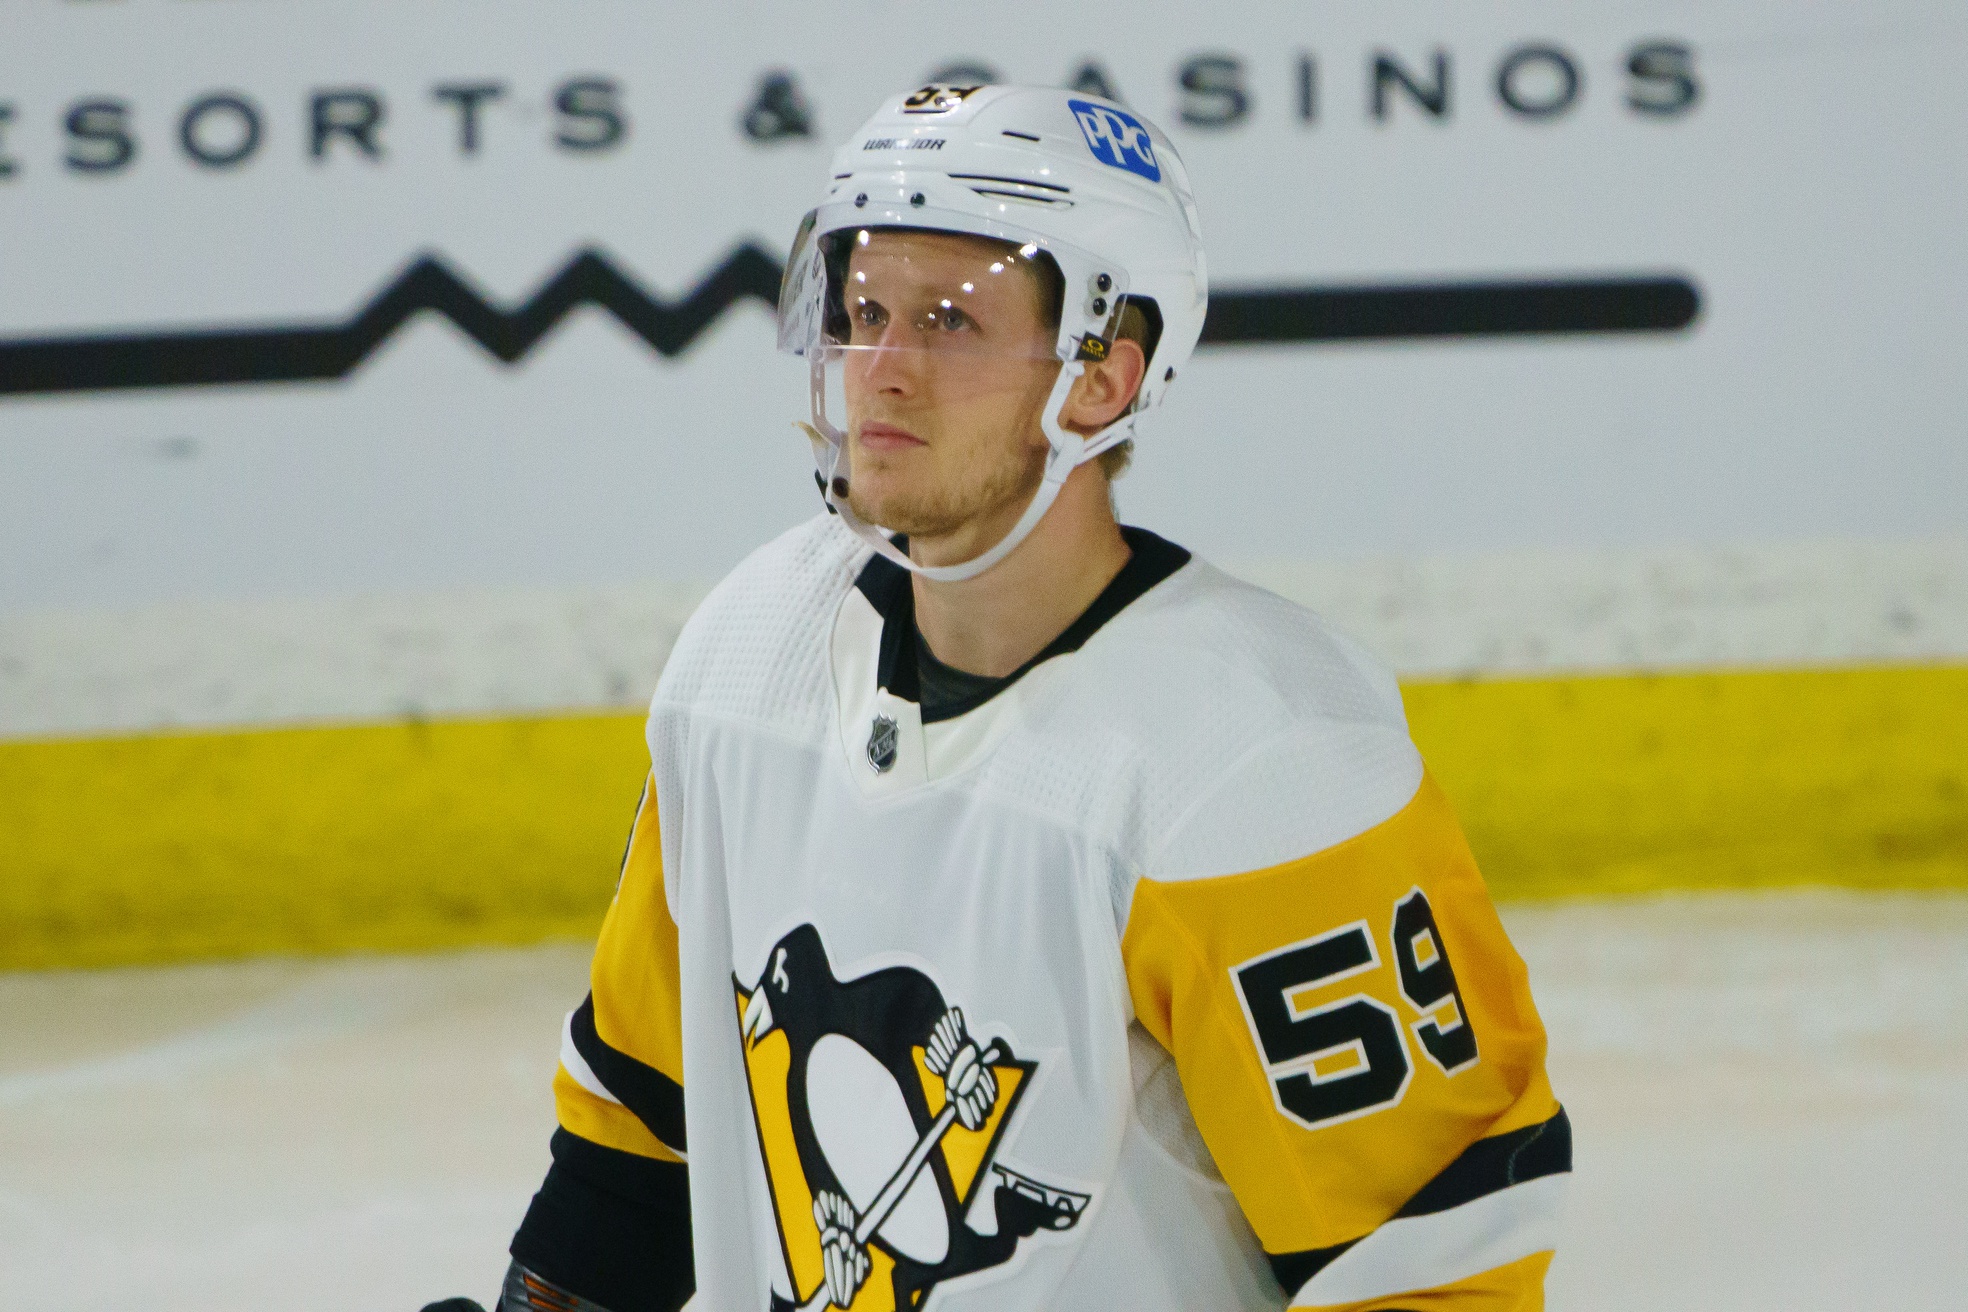 New Jersey Devils at Pittsburgh Penguins odds, picks and predictions